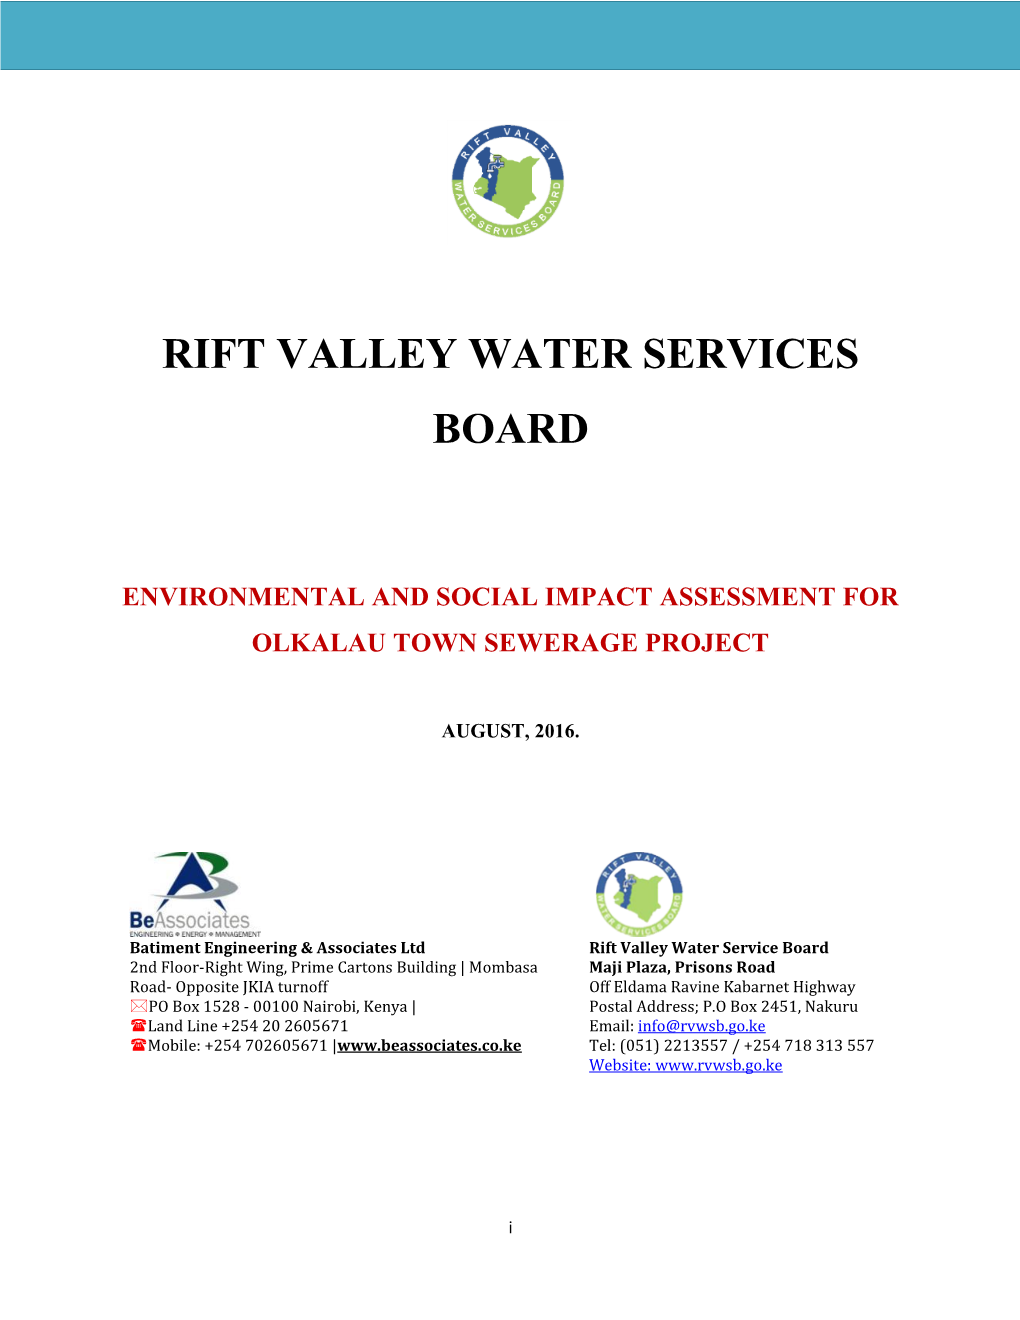 Rift Valley Water Services Board